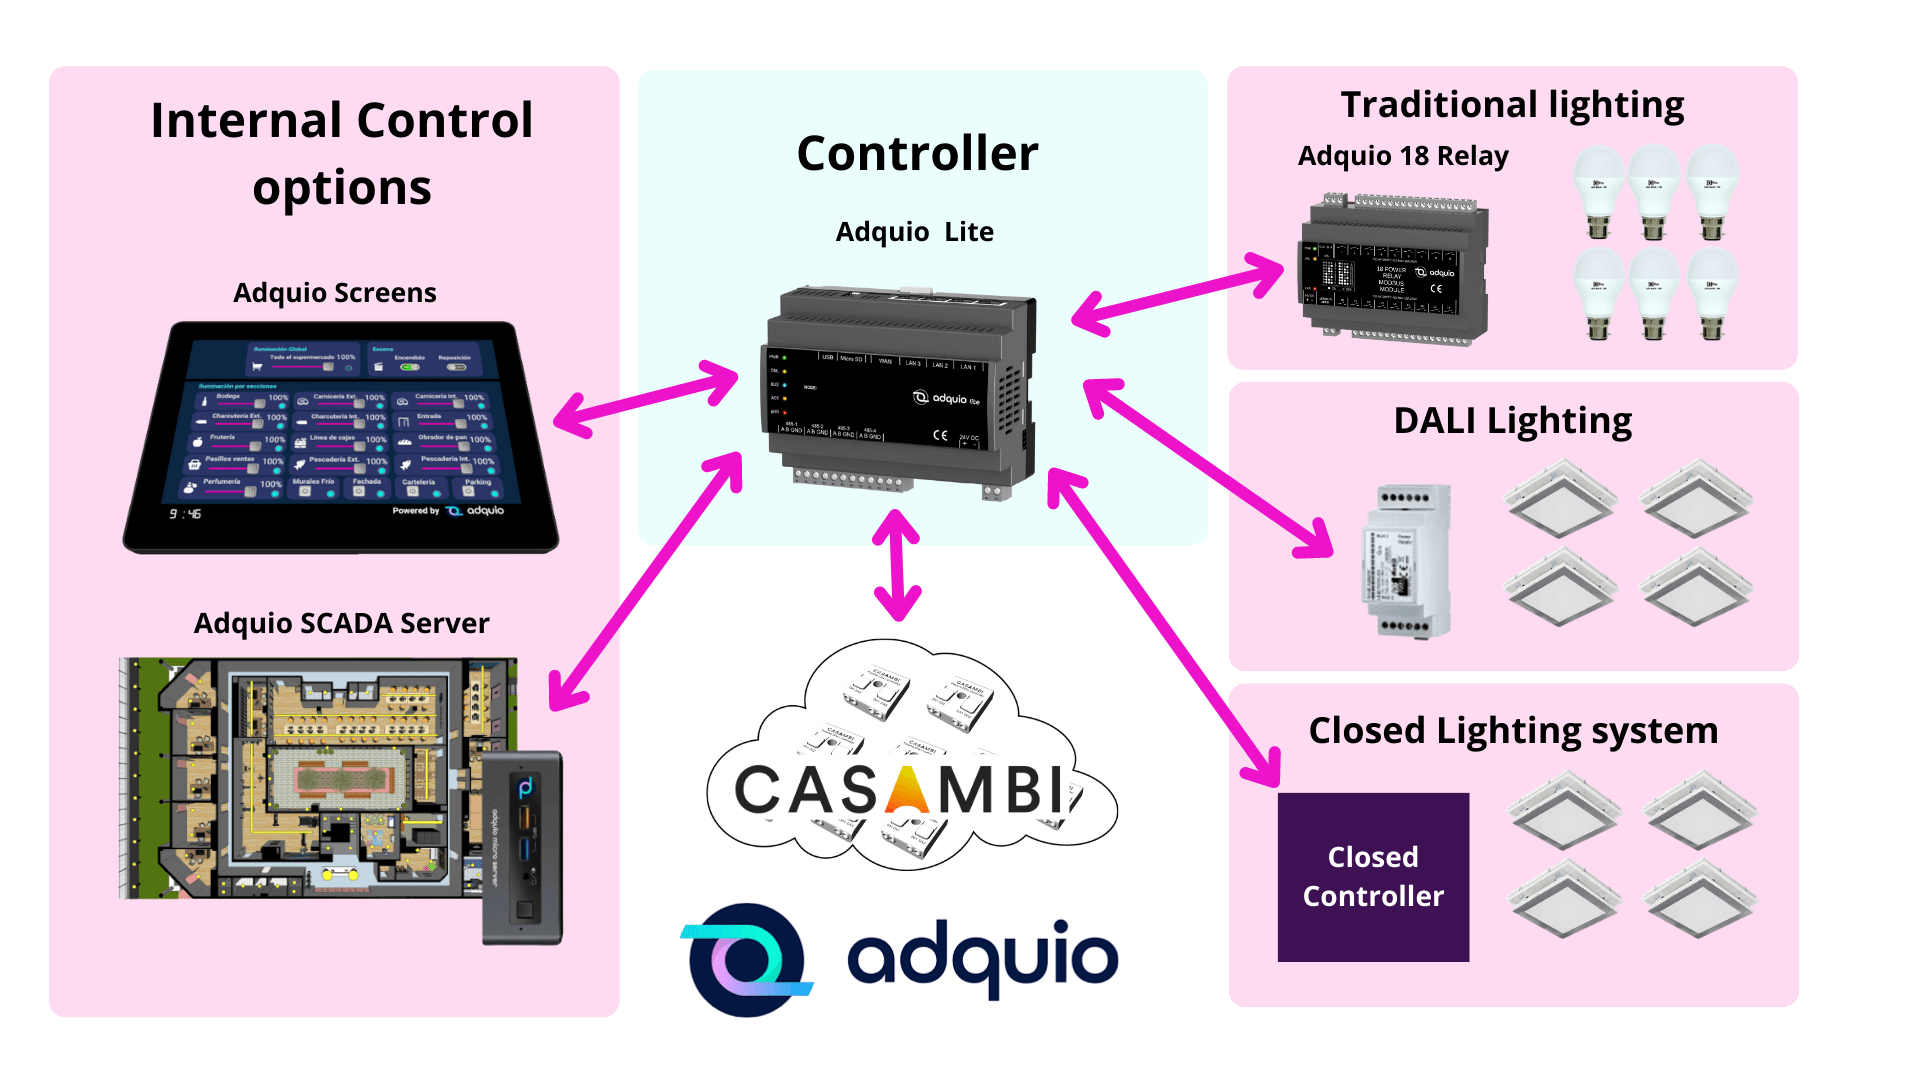 Extending traditional installations with Casambi